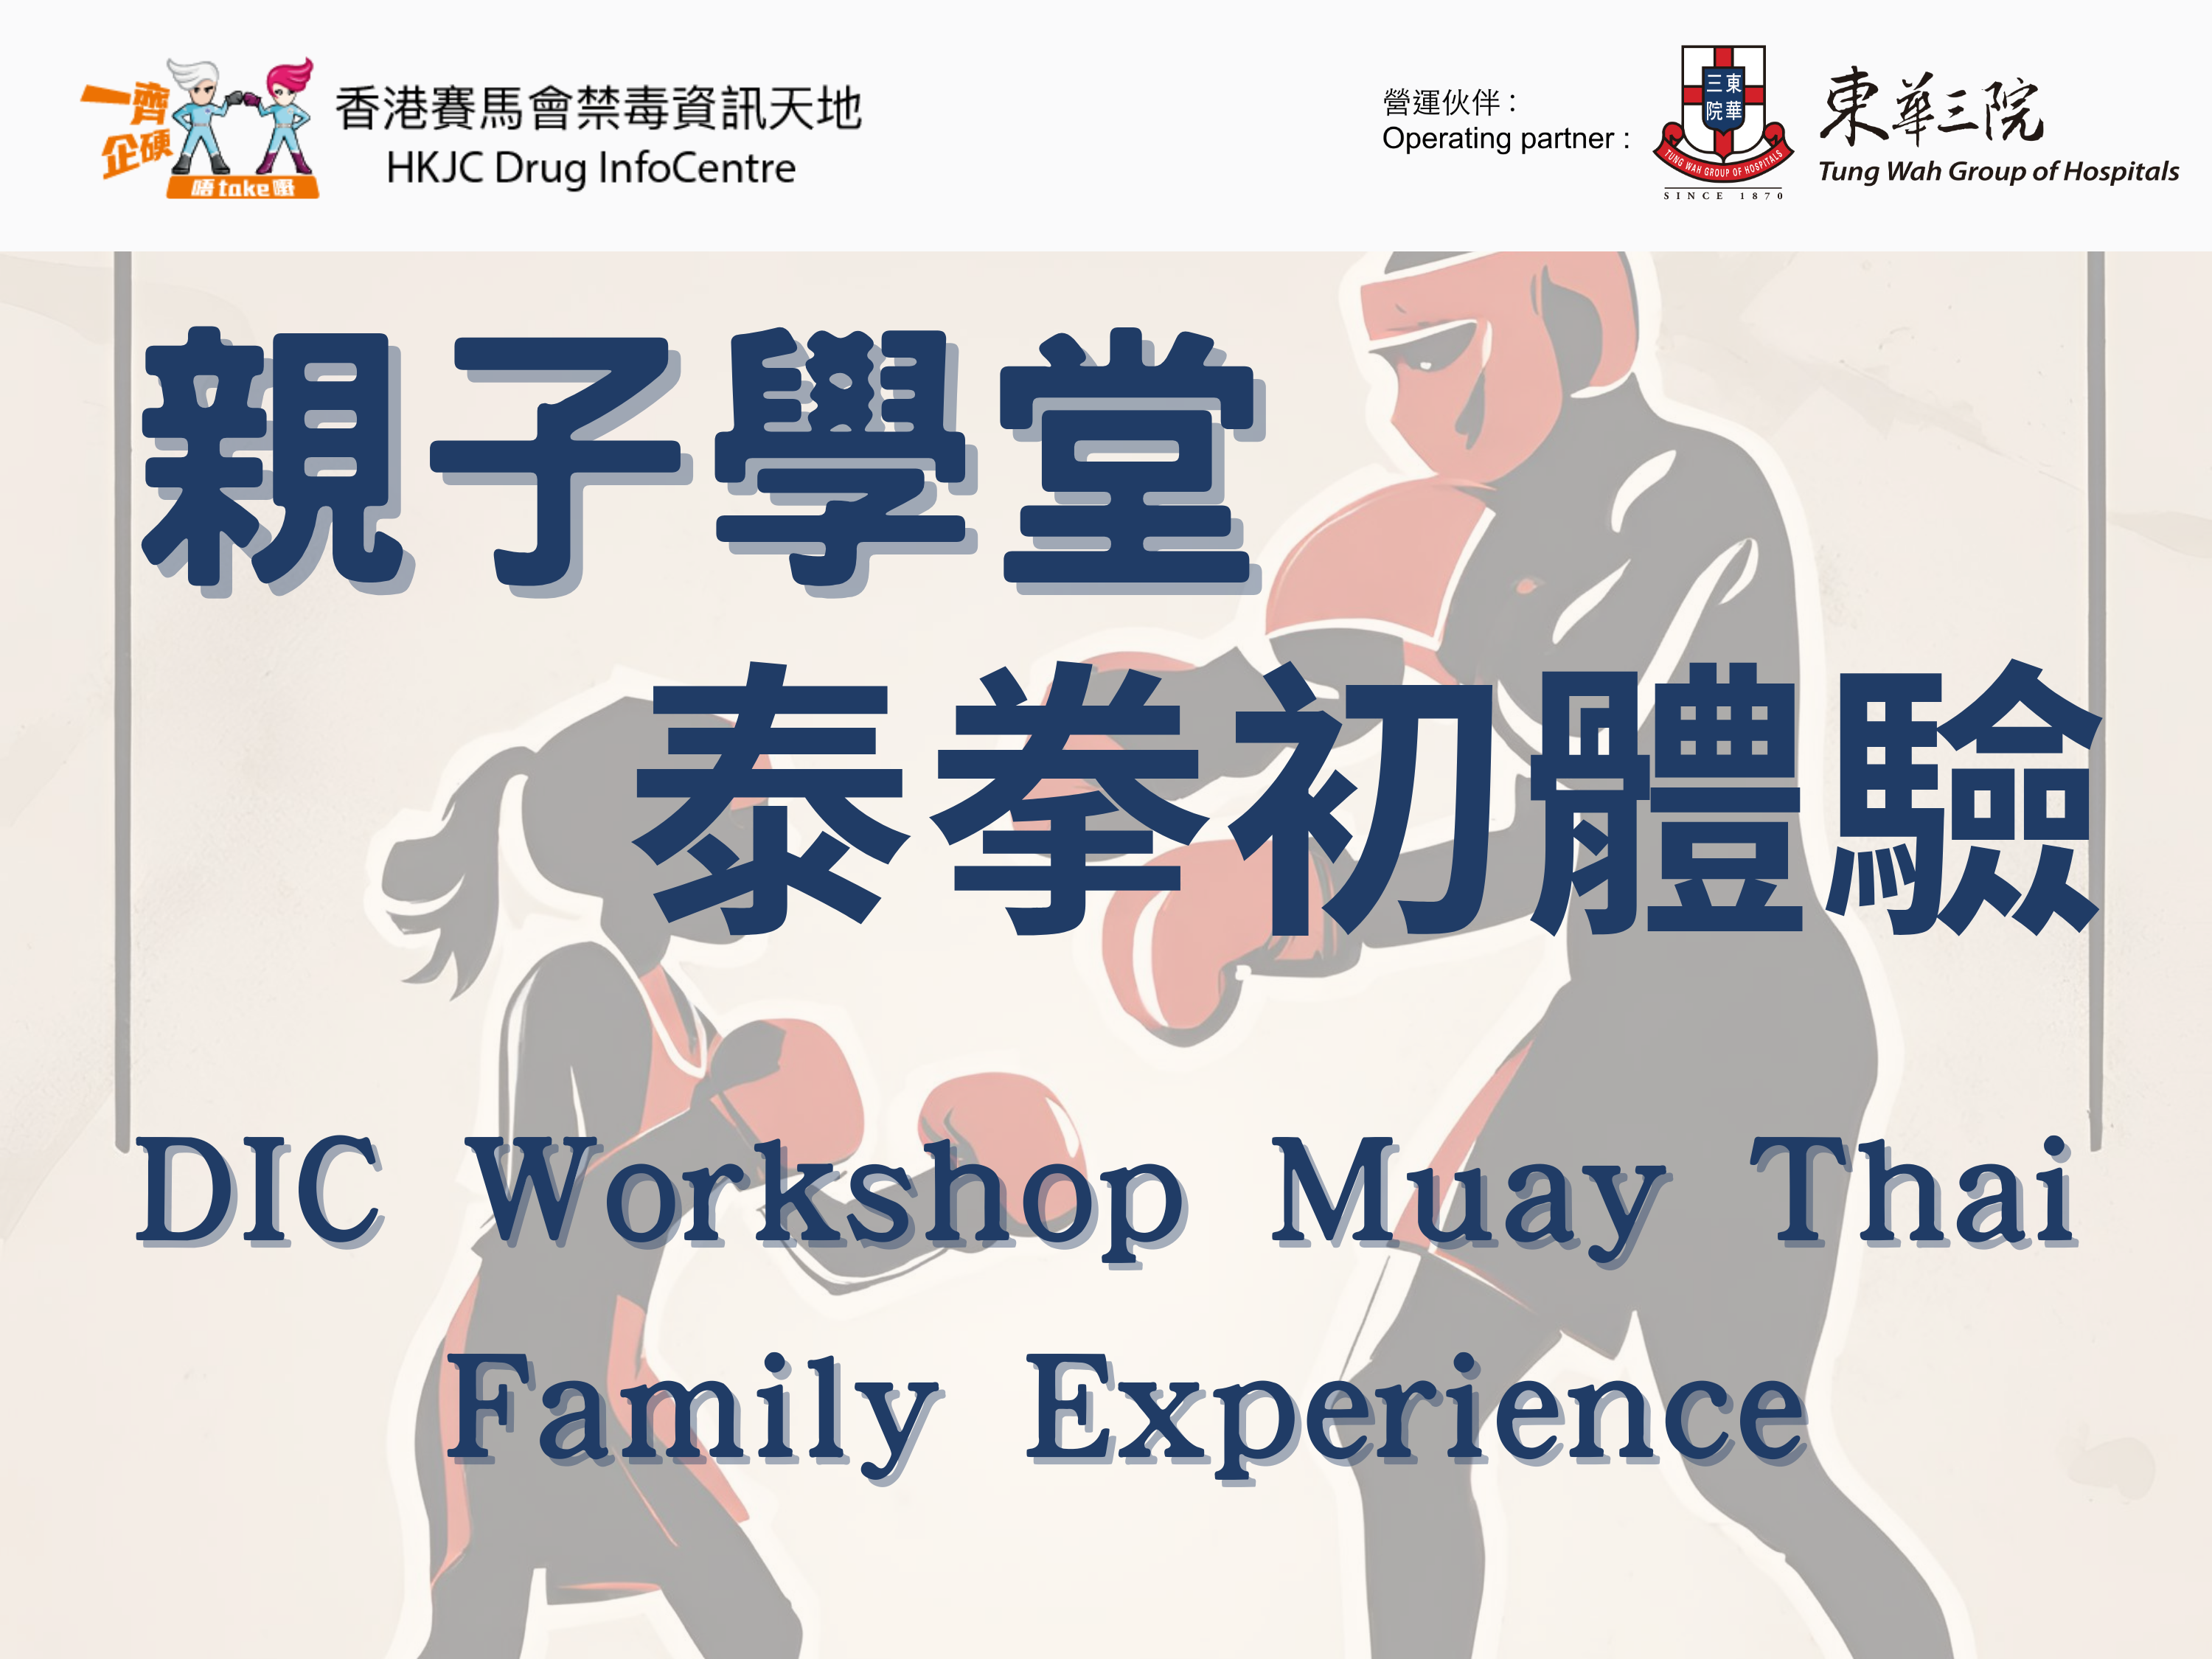 DIC Workshop Muay Thai Family Experience 